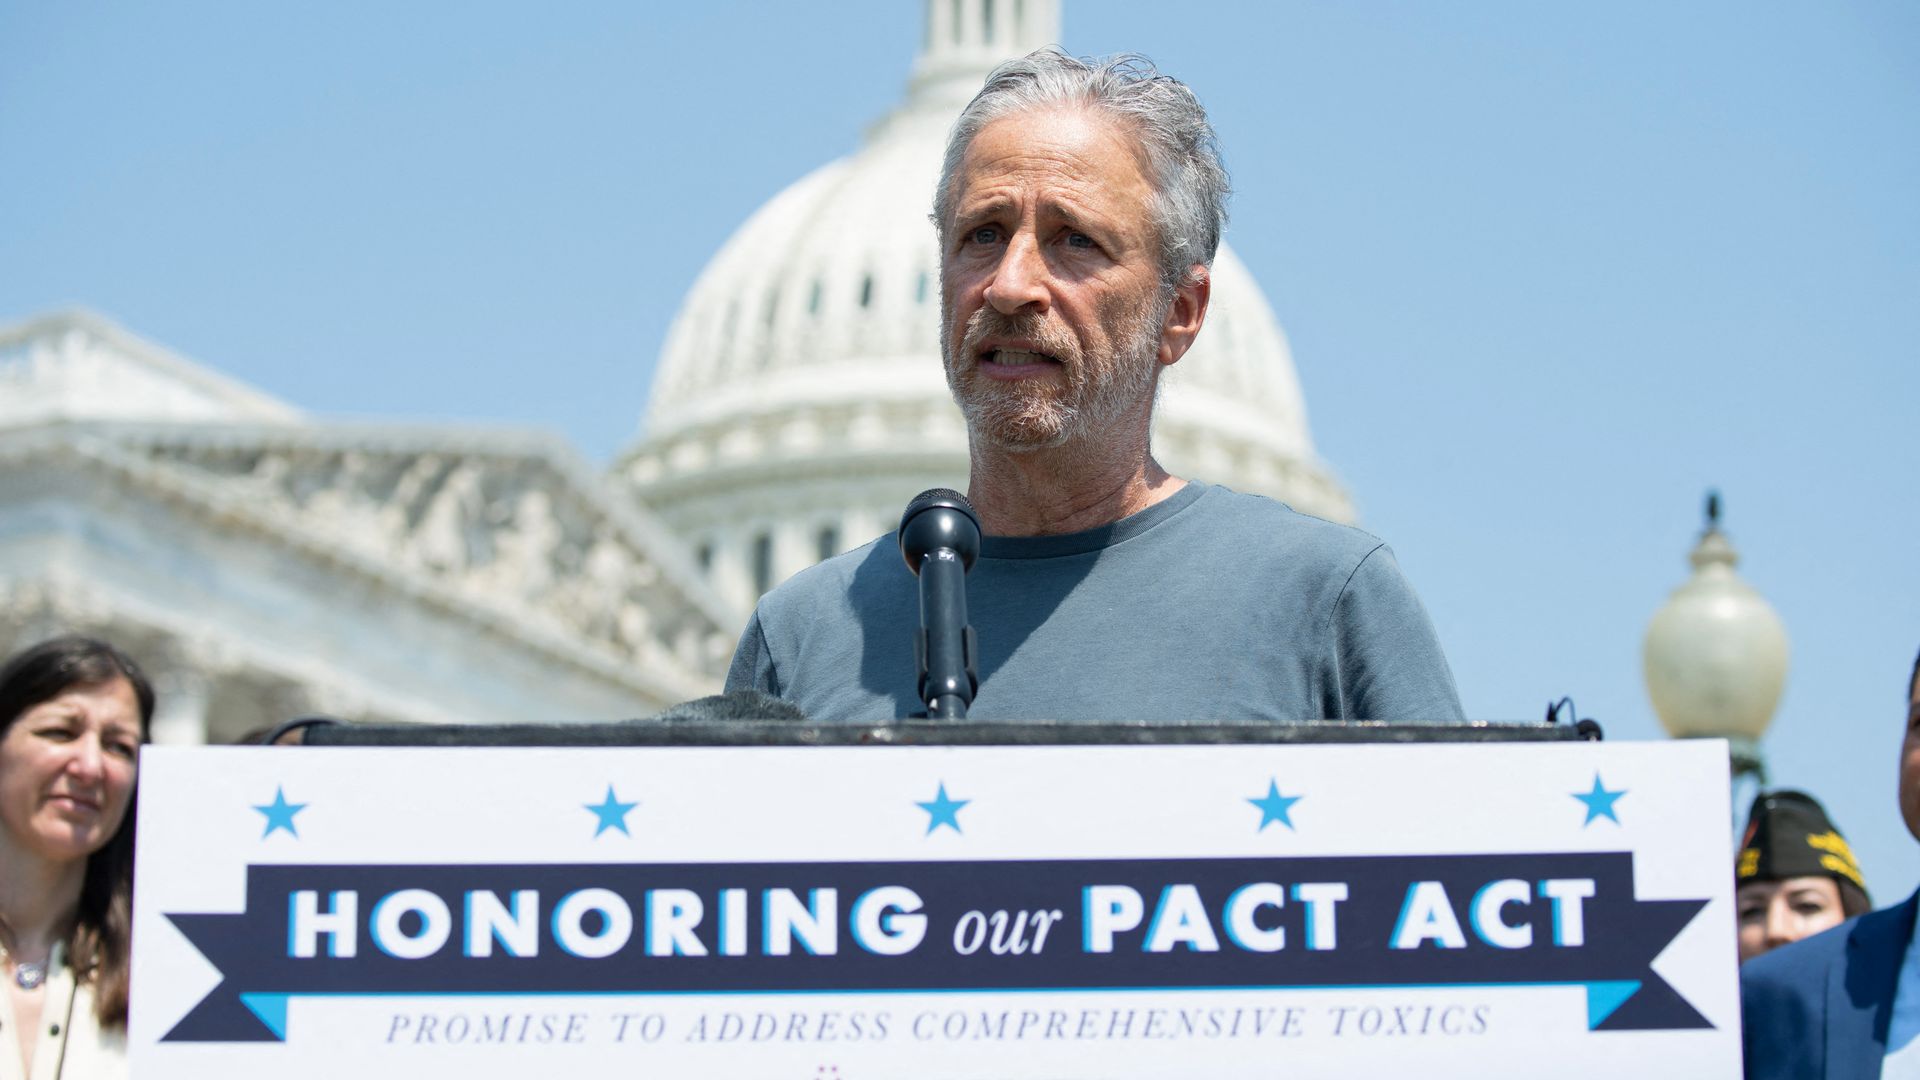 Comedian Jon Stewart speaks during a press conference outside the US Capitol in Washington, DC, May 26